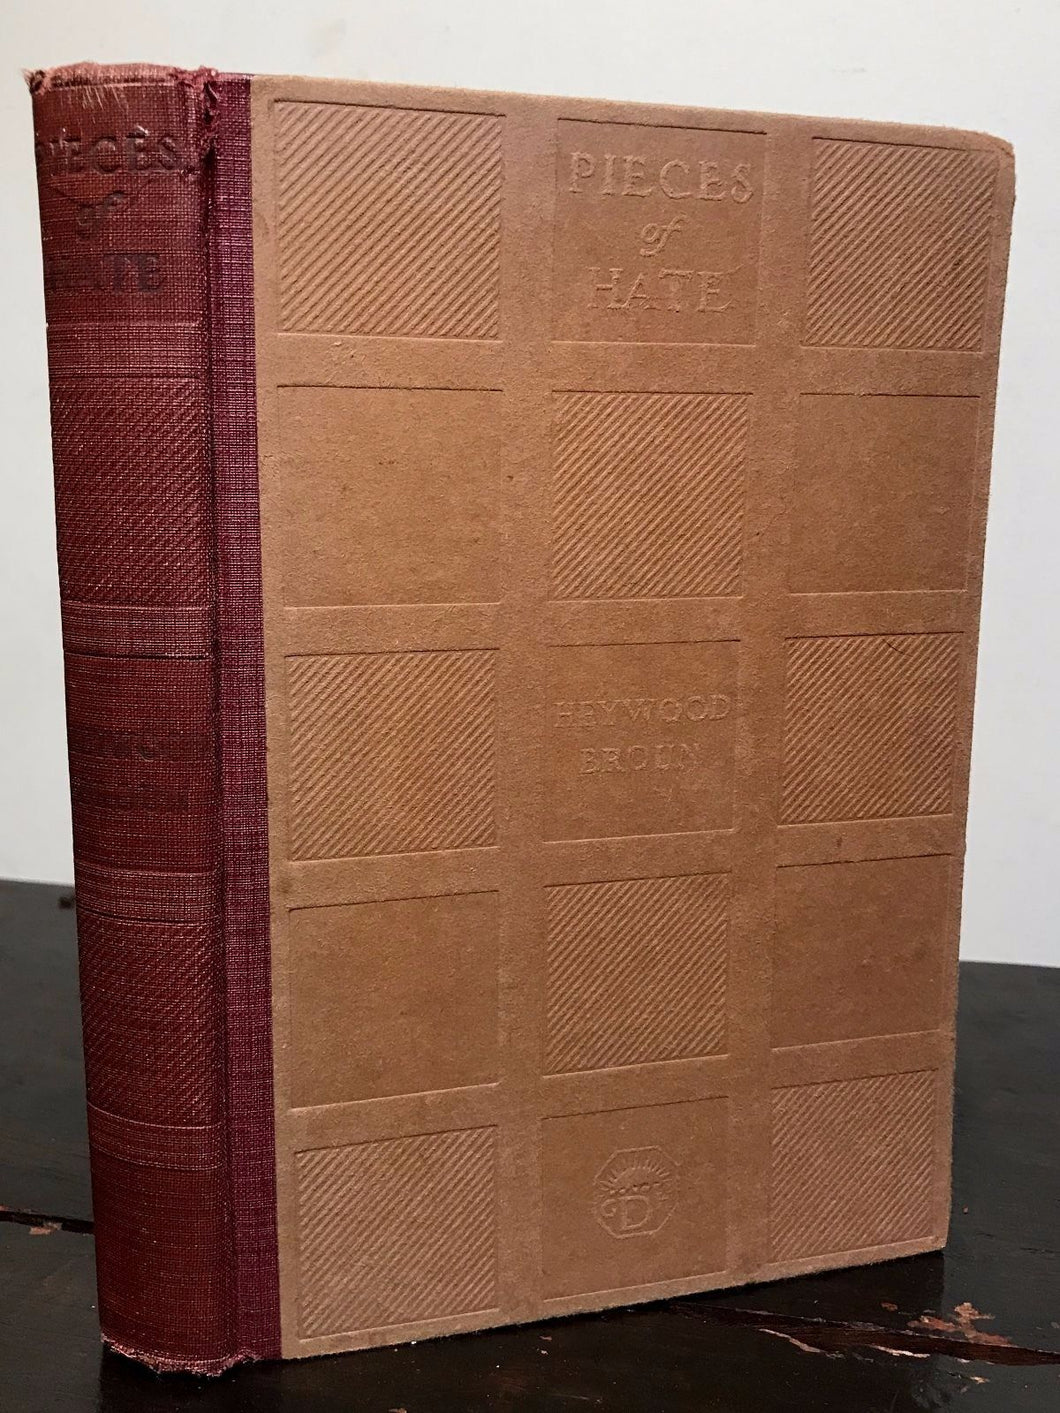 PIECES OF HATE And Other Enthusiasms Heywood Broun 1st/1st 1922 Humor Daily Life